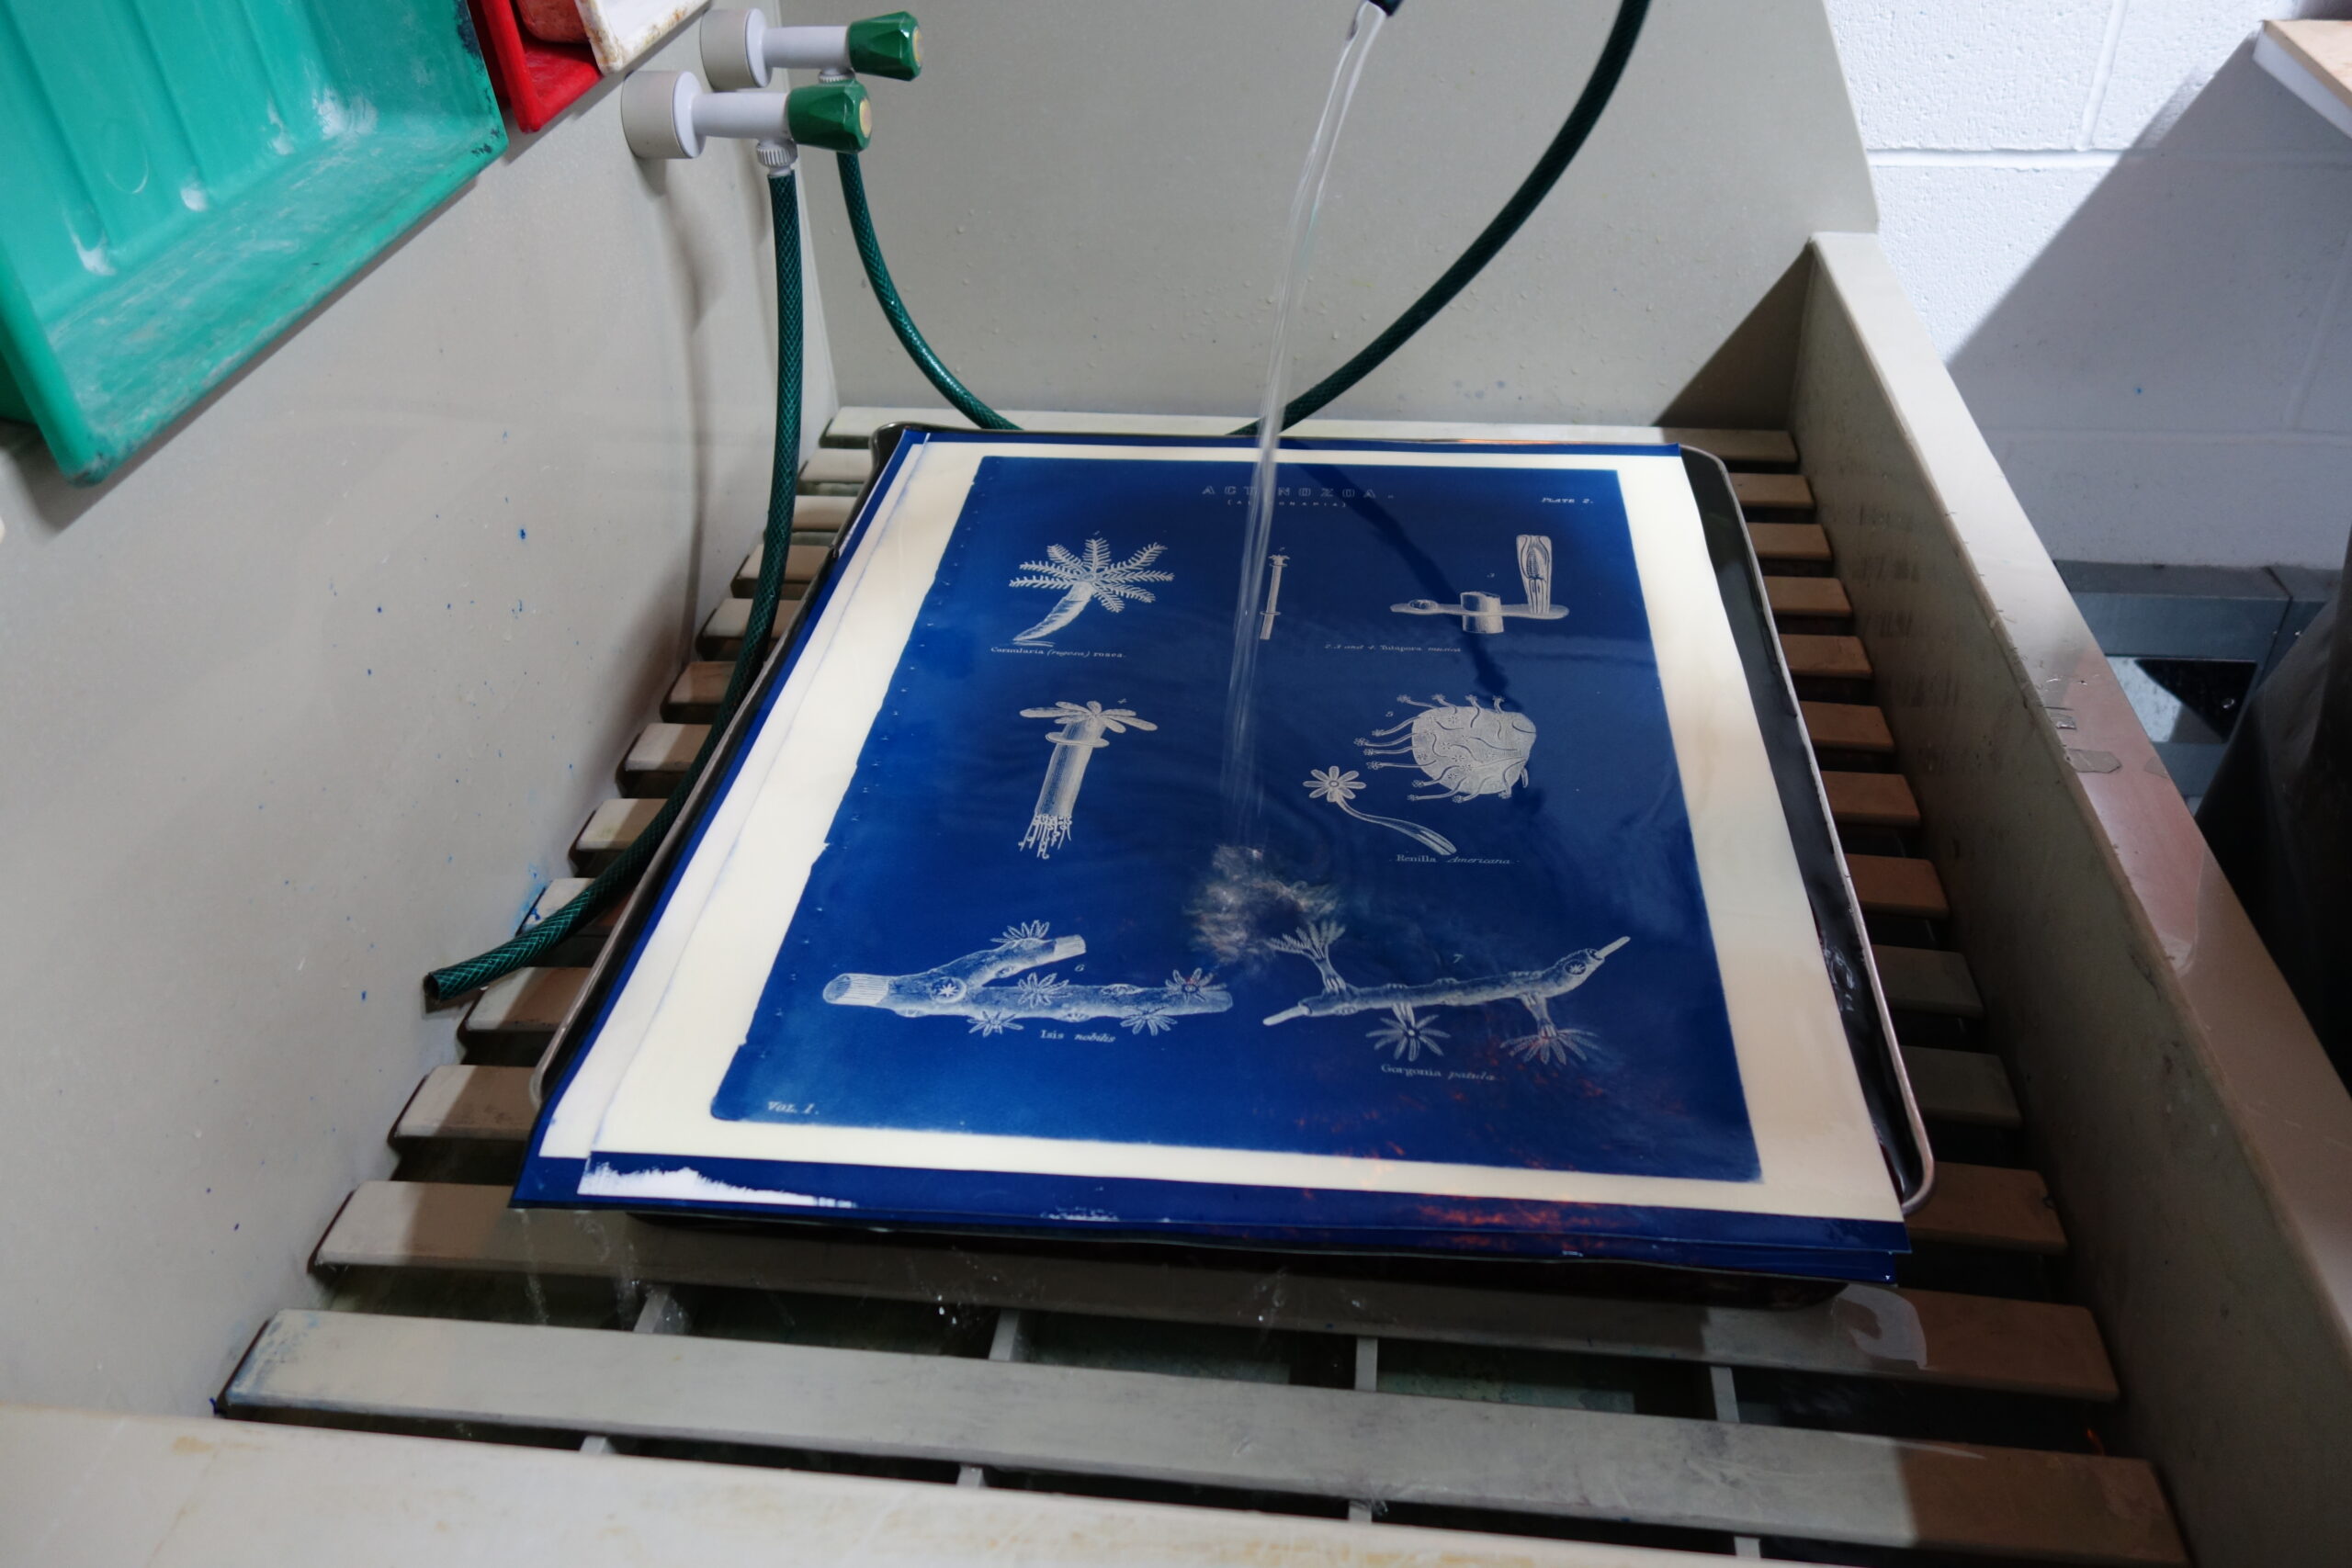 Working with master printmaker Alan Smith at Royal College of Art; © Sarah Gillett